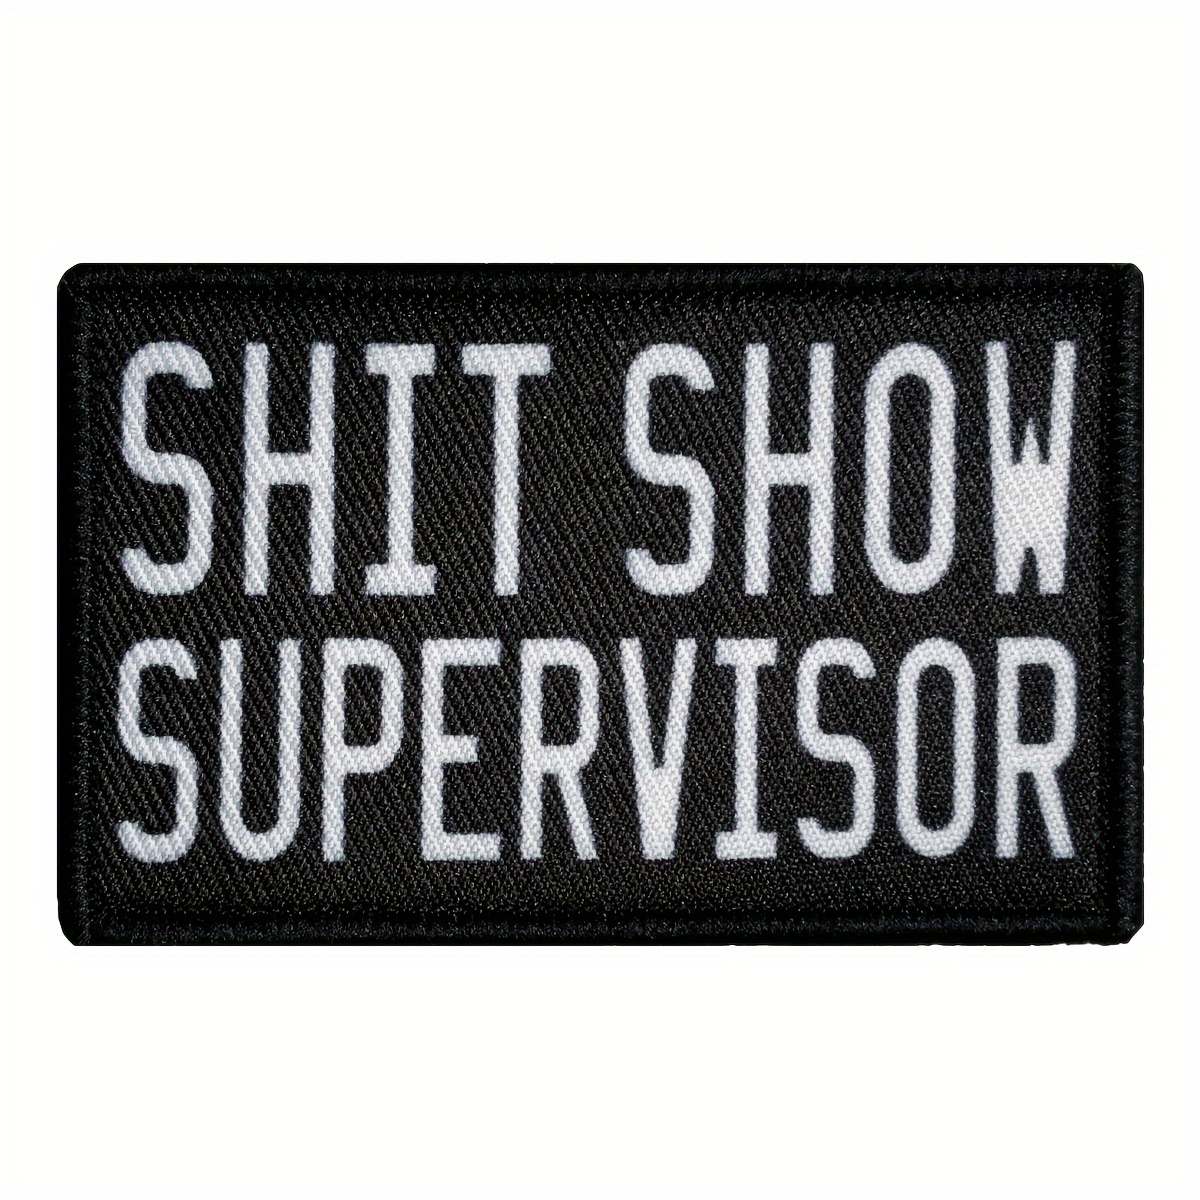 Funny Military Saying Patches - Sew or Iron on - Embroidered